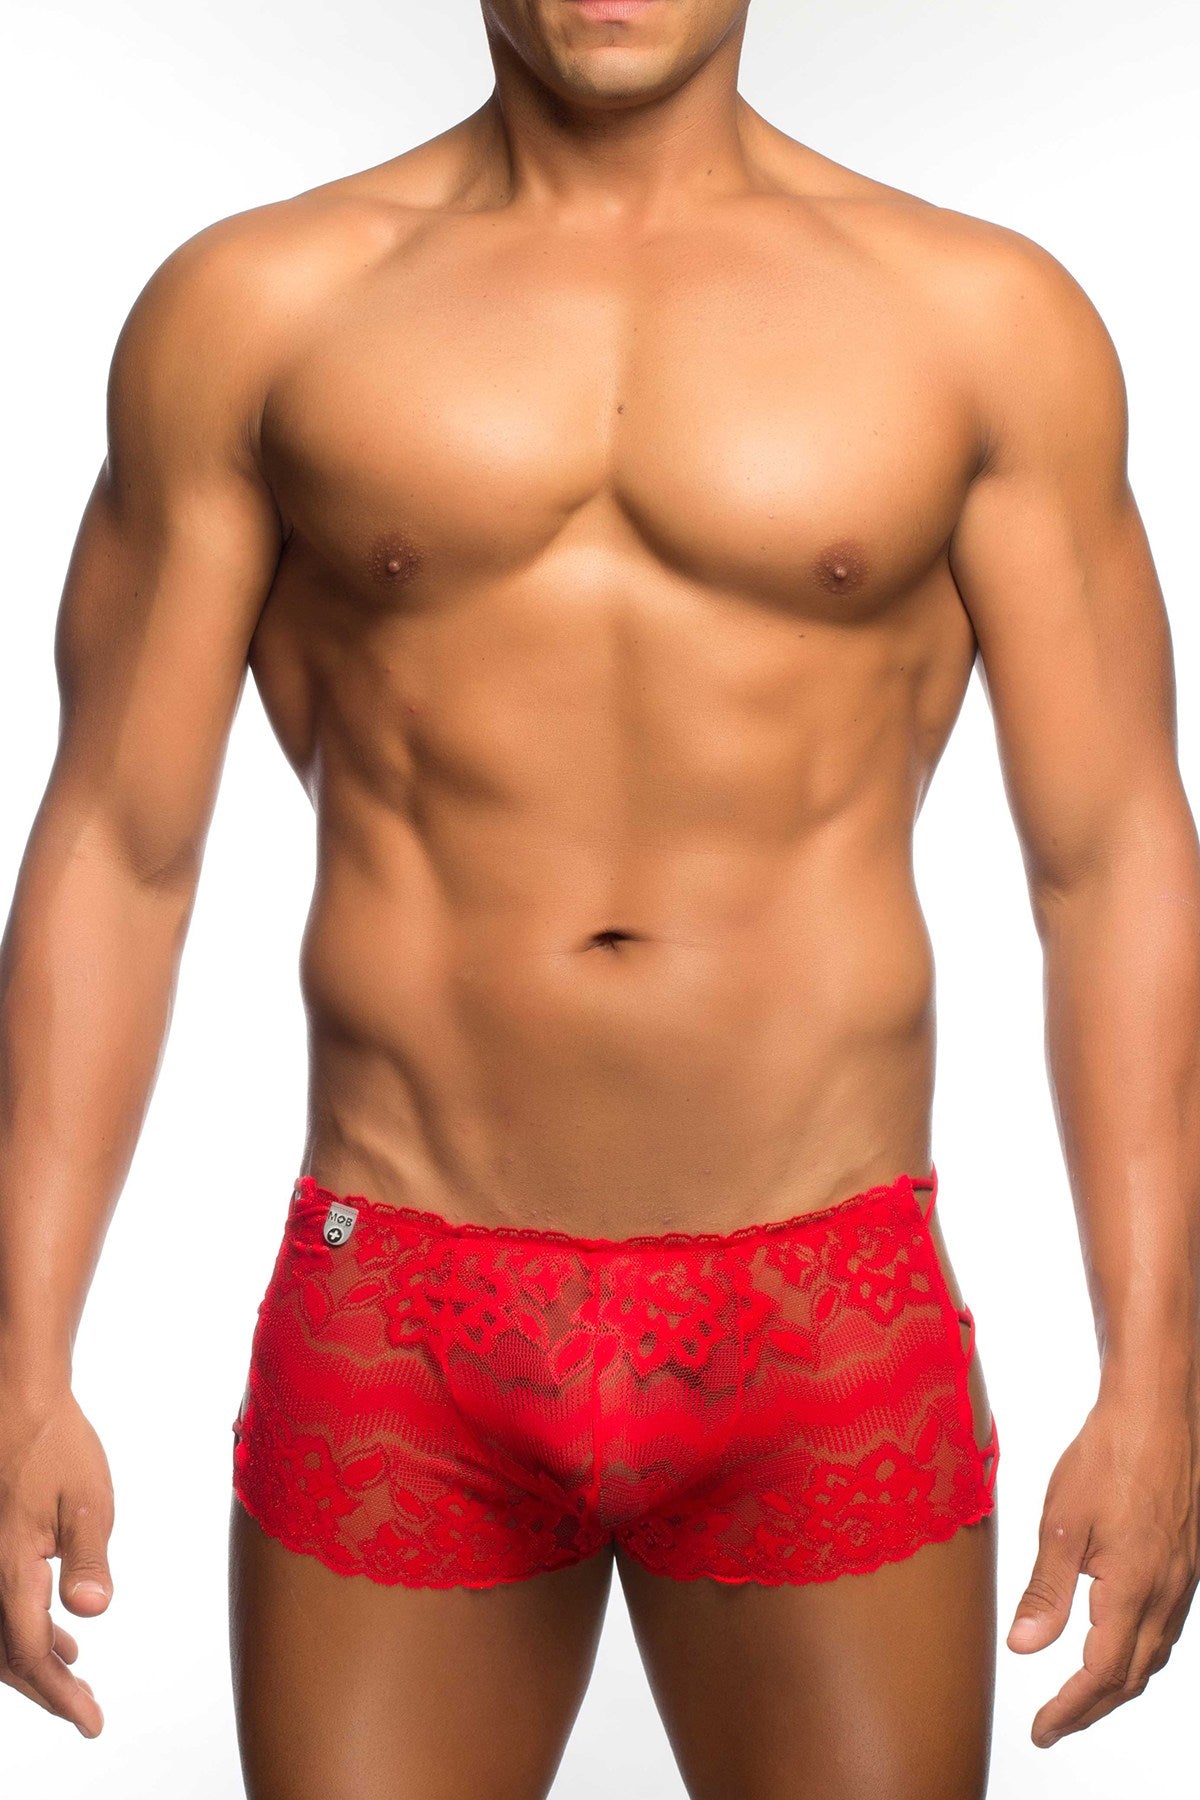 Malebasics Red Lace Open Boxer